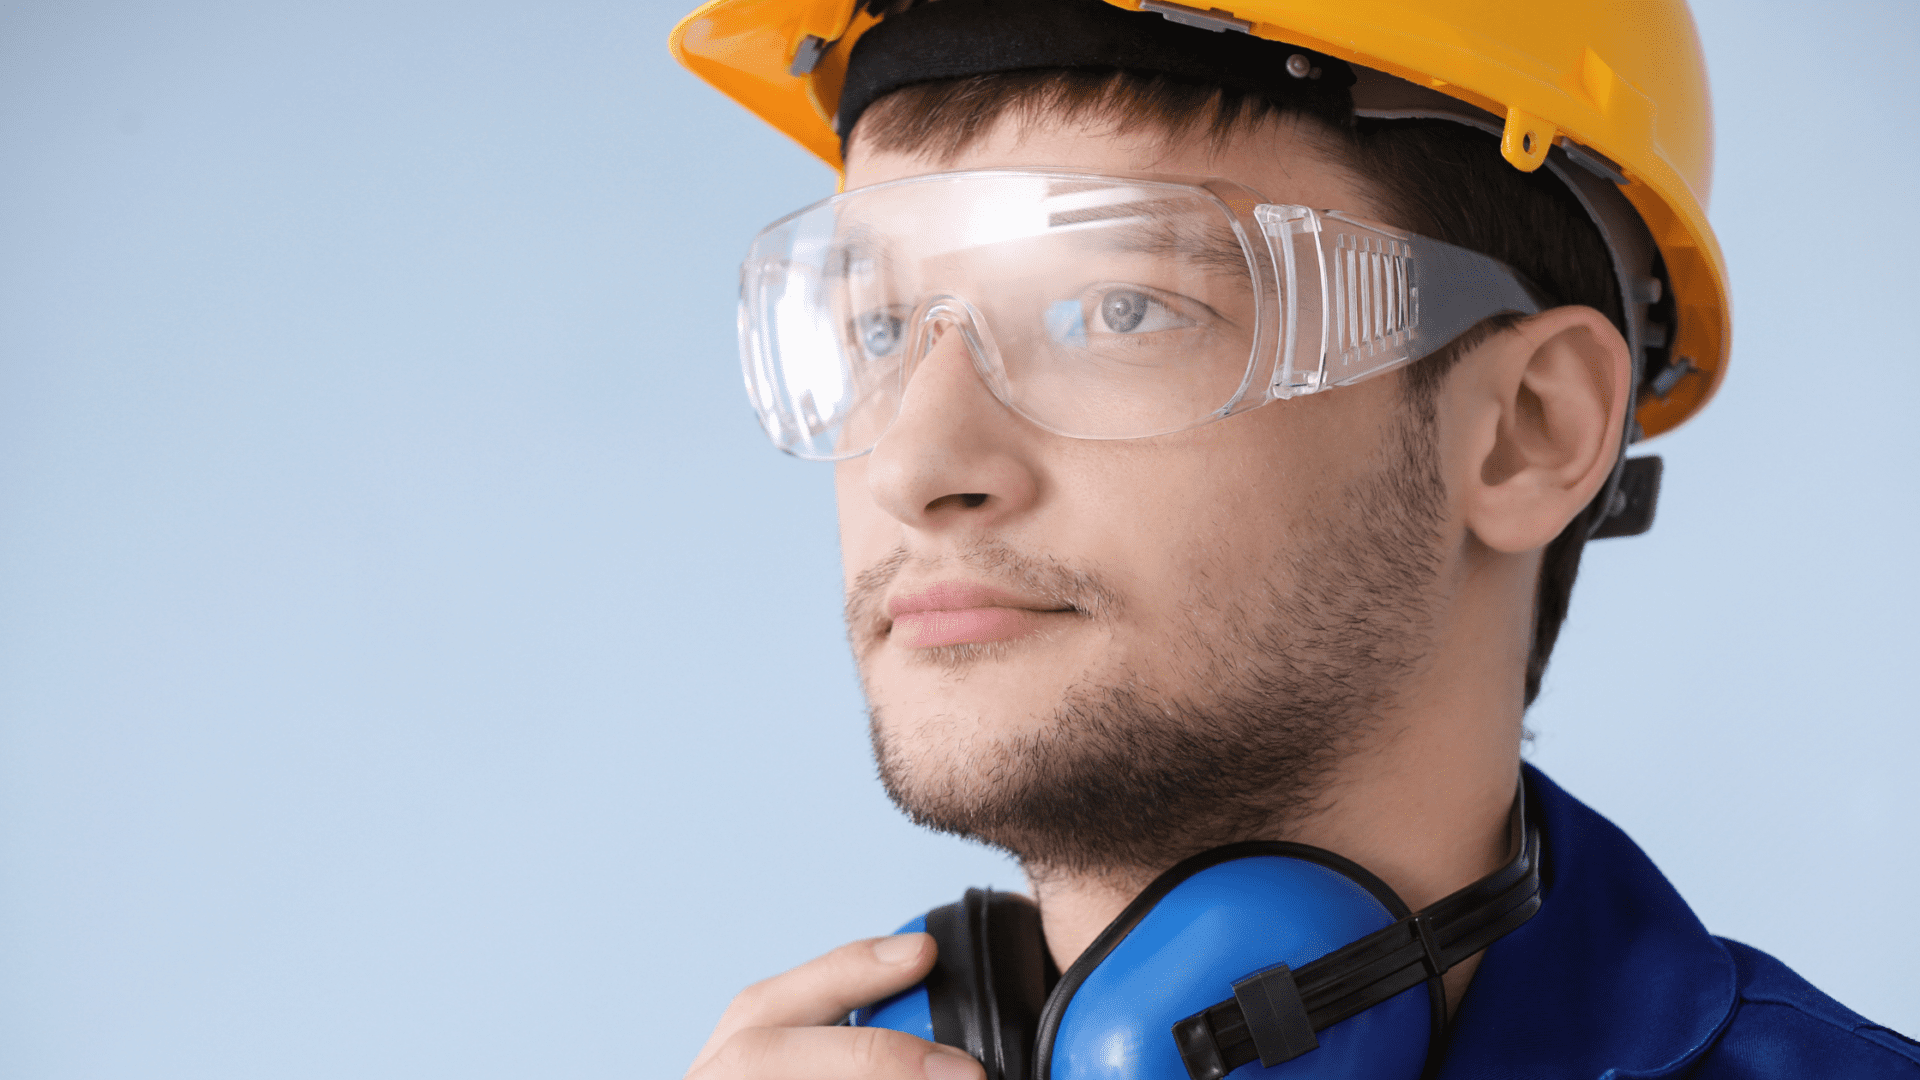 male worker wearing safety gear including protective helmet, ear protection and safety glasses